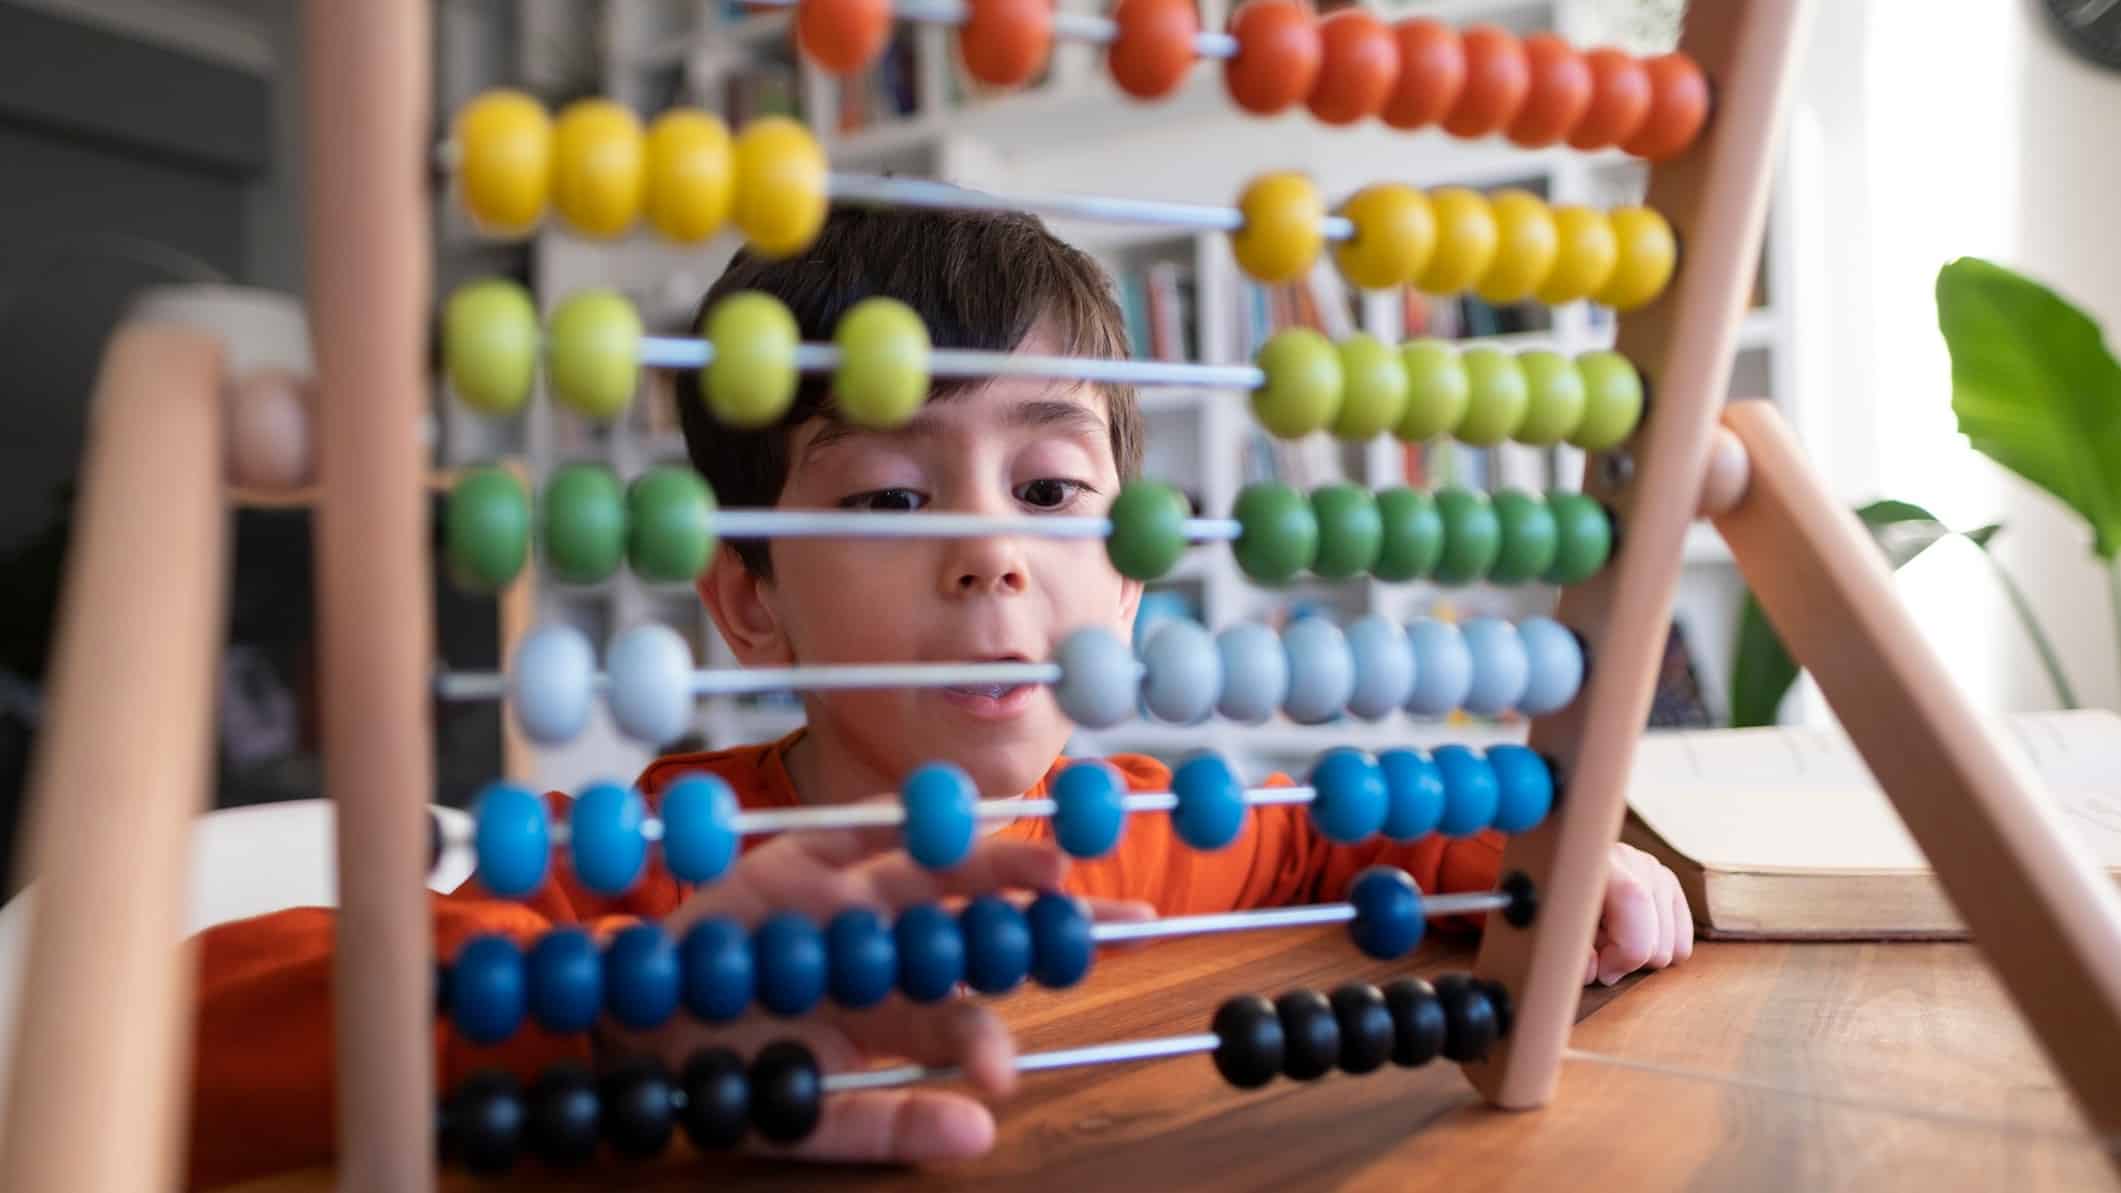 A boy's eyes pop wide open as he calculates something on his abacus.